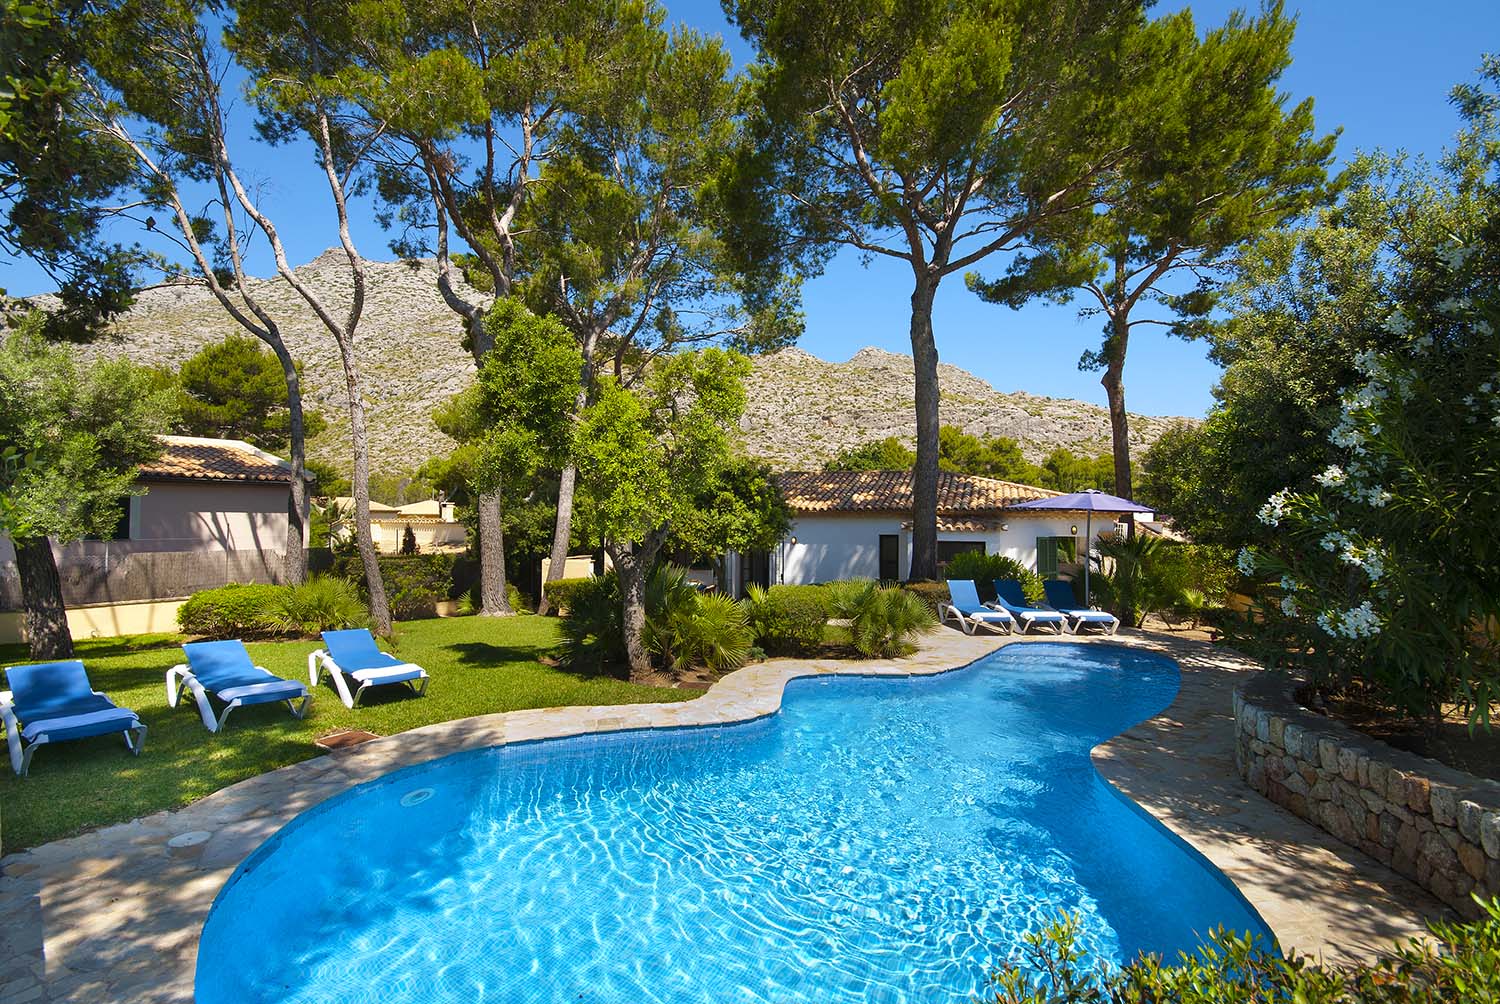 Can Domingo is a nice villa in Cala San Vicente close to the beach